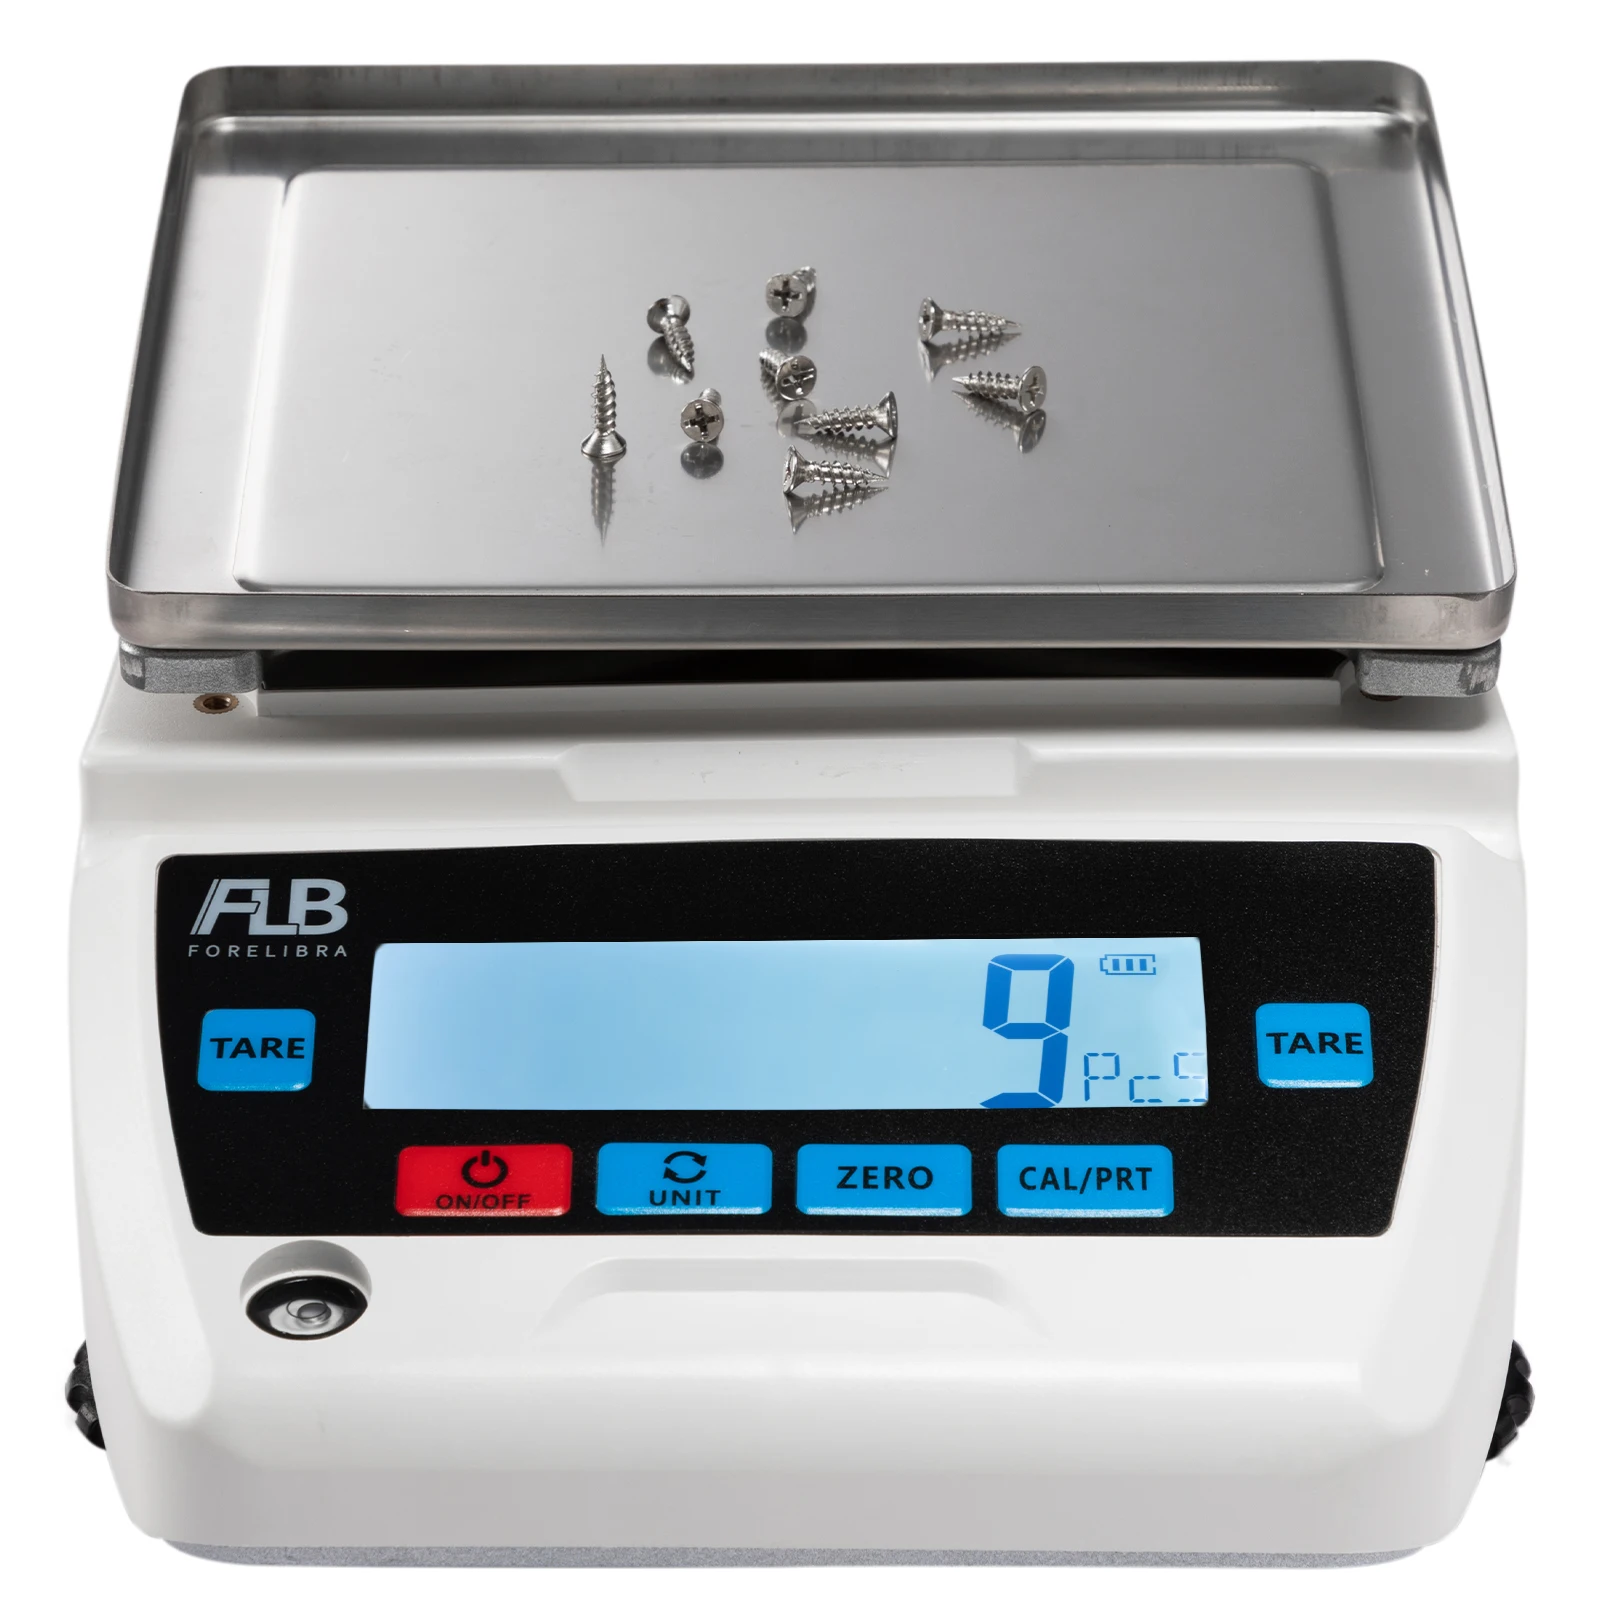 https://ae01.alicdn.com/kf/Sbbe95cd2340c4ef0b75bc516716af93aN/High-Precision-Lab-Scales-0-1g-Accuracy-Digital-Laboratory-Scales-Weighting-Scales-for-Scientific-or-Industrial.jpg